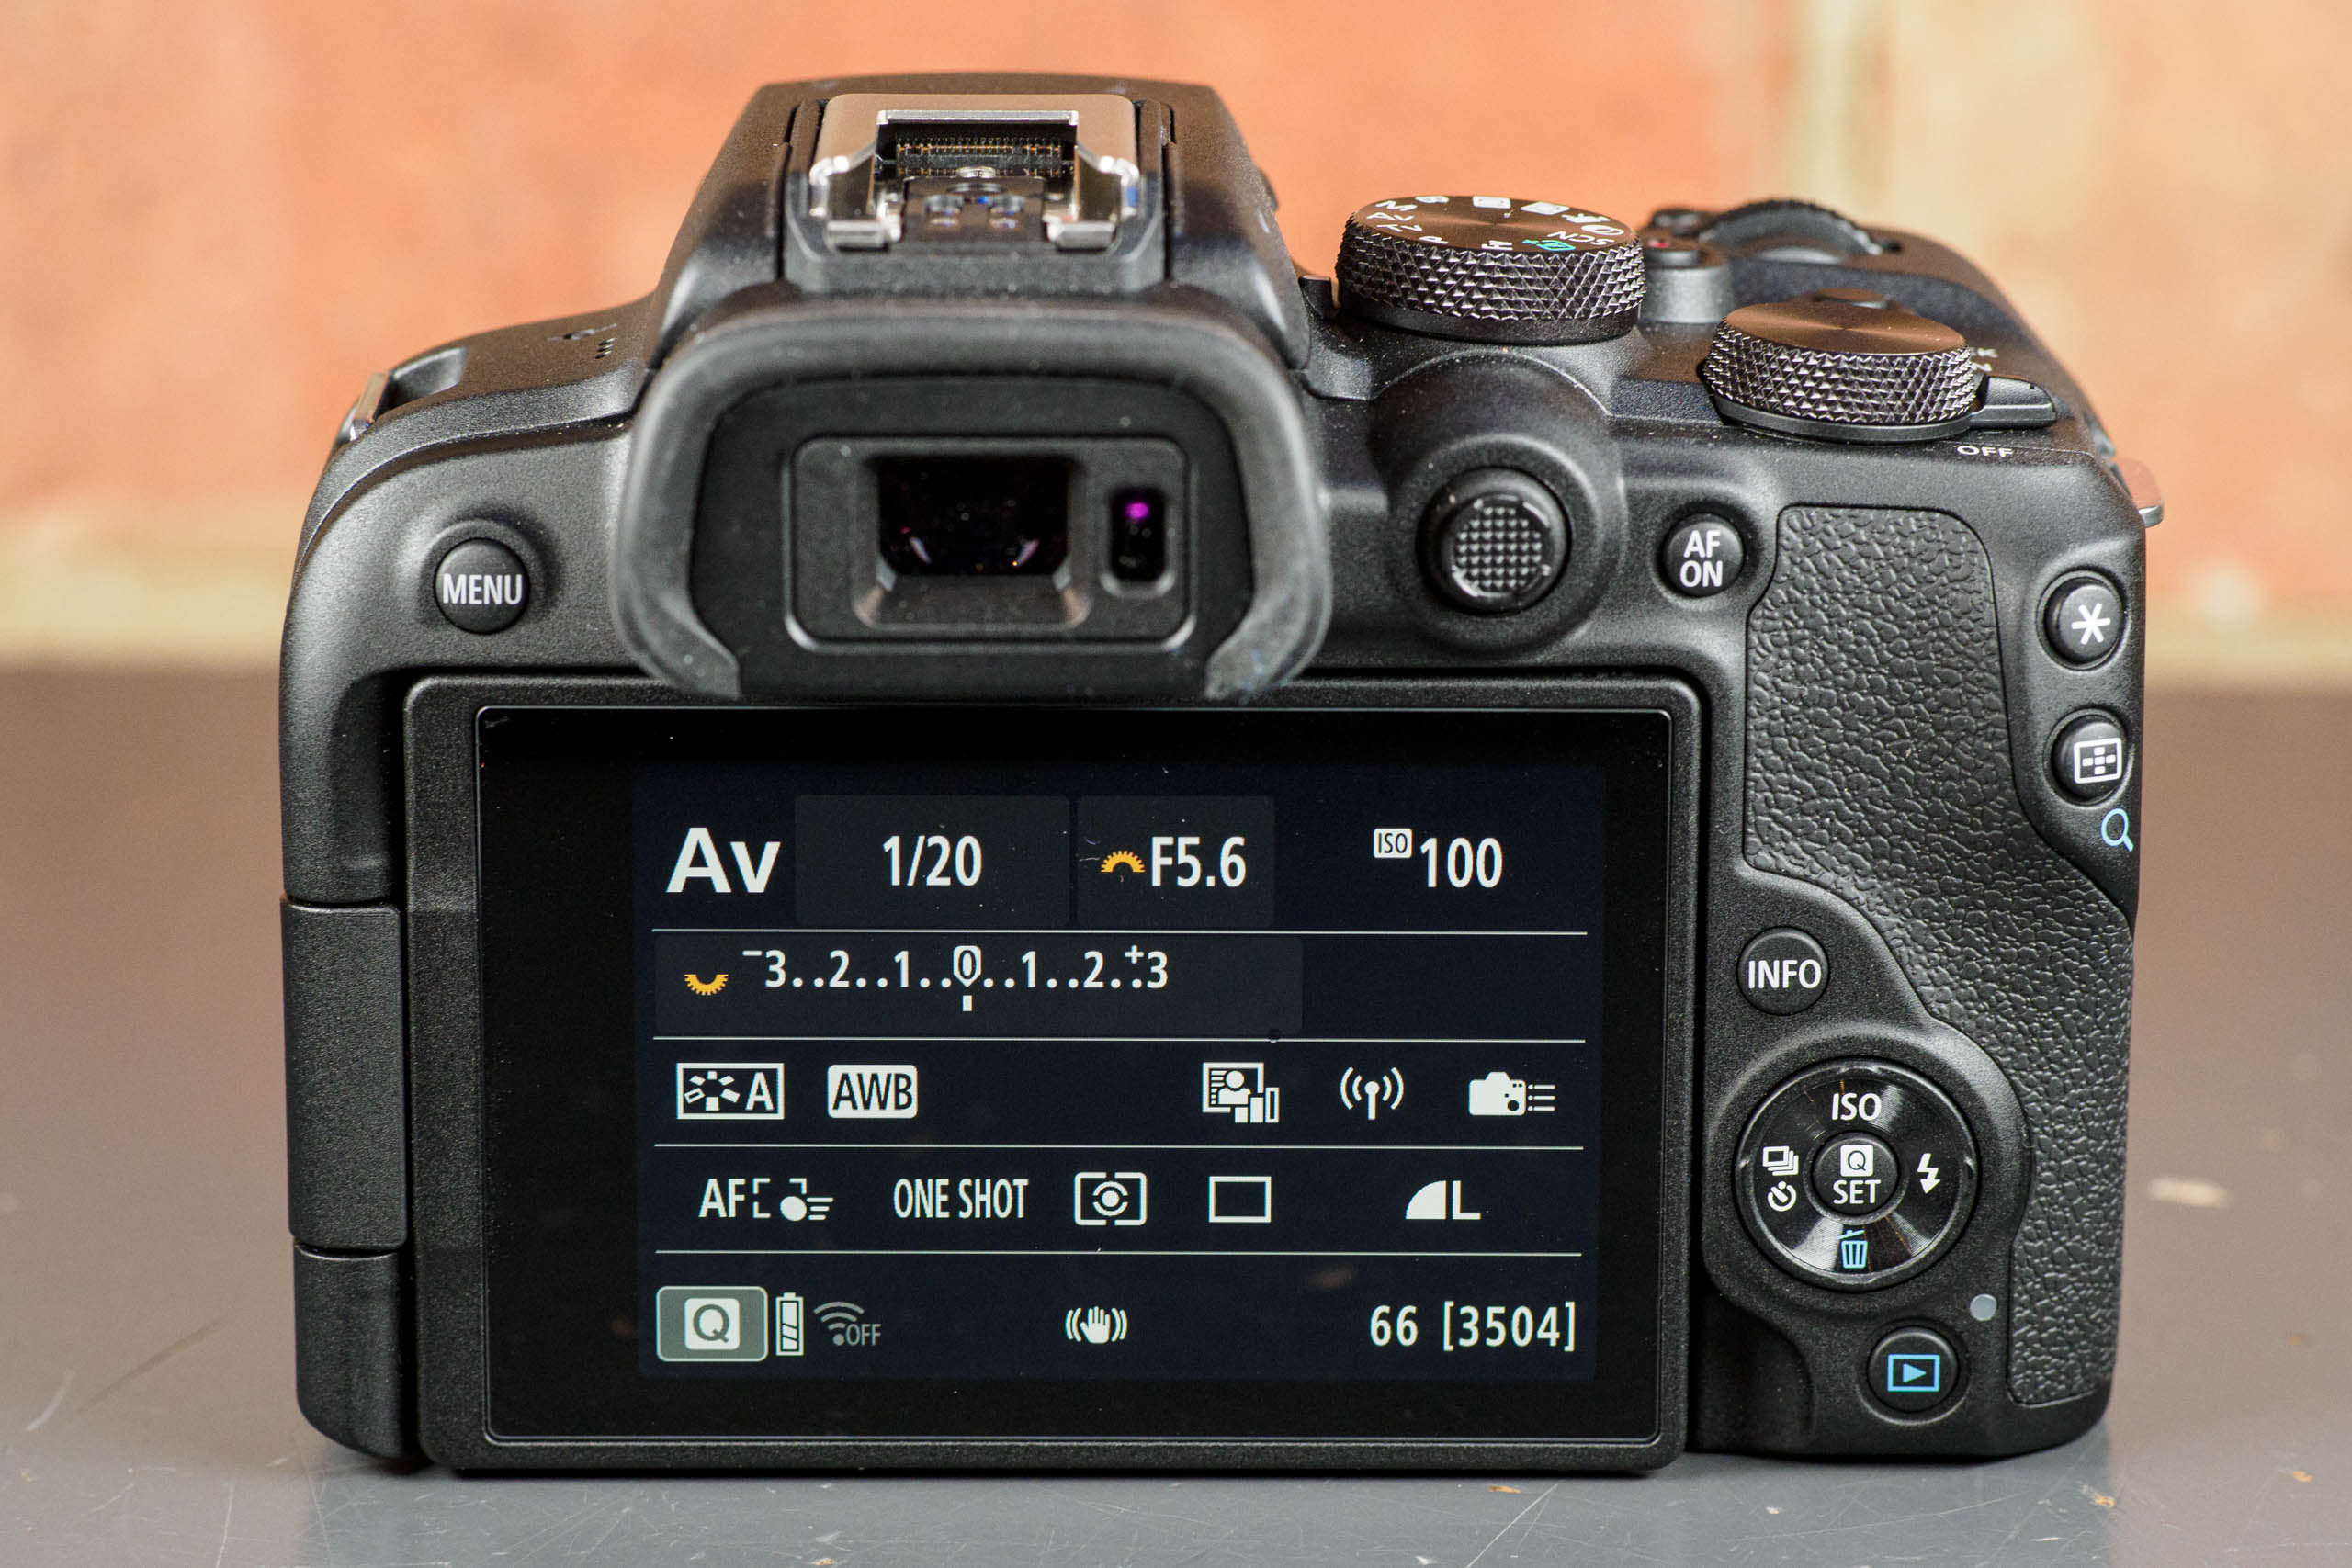 Canon Eos R10 LCD screen with shooting menu displayed